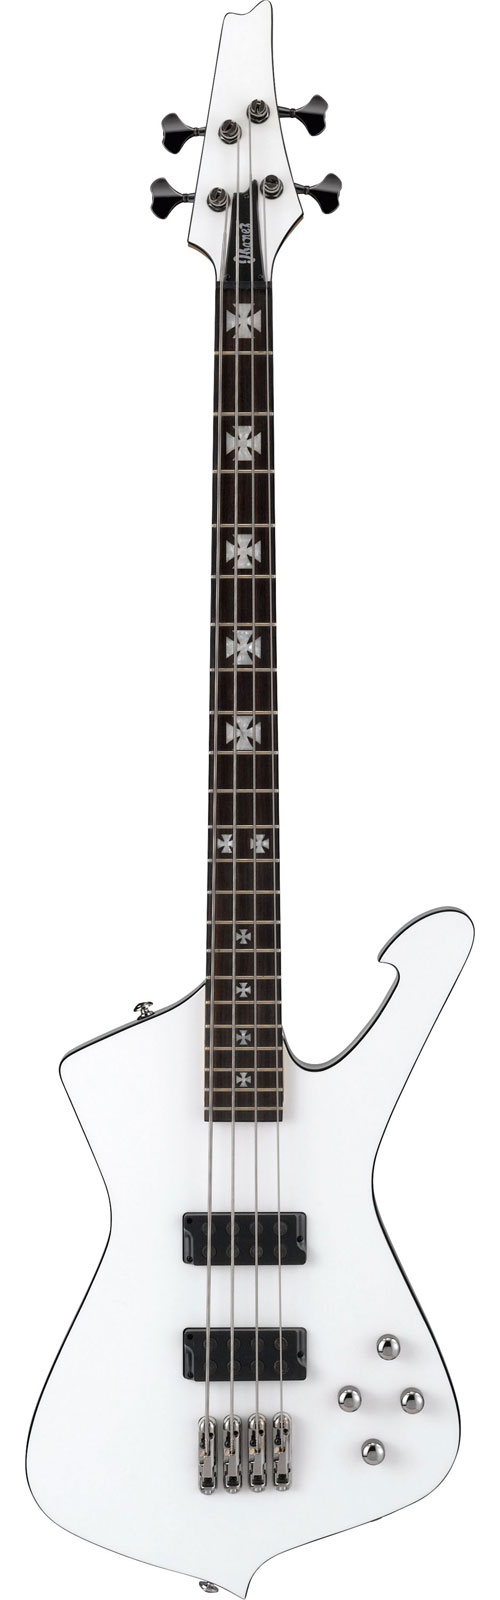 IBANEZ SDB3-PW-PEARL WHITE SHARLEE D'ANGELO SIGNATURE